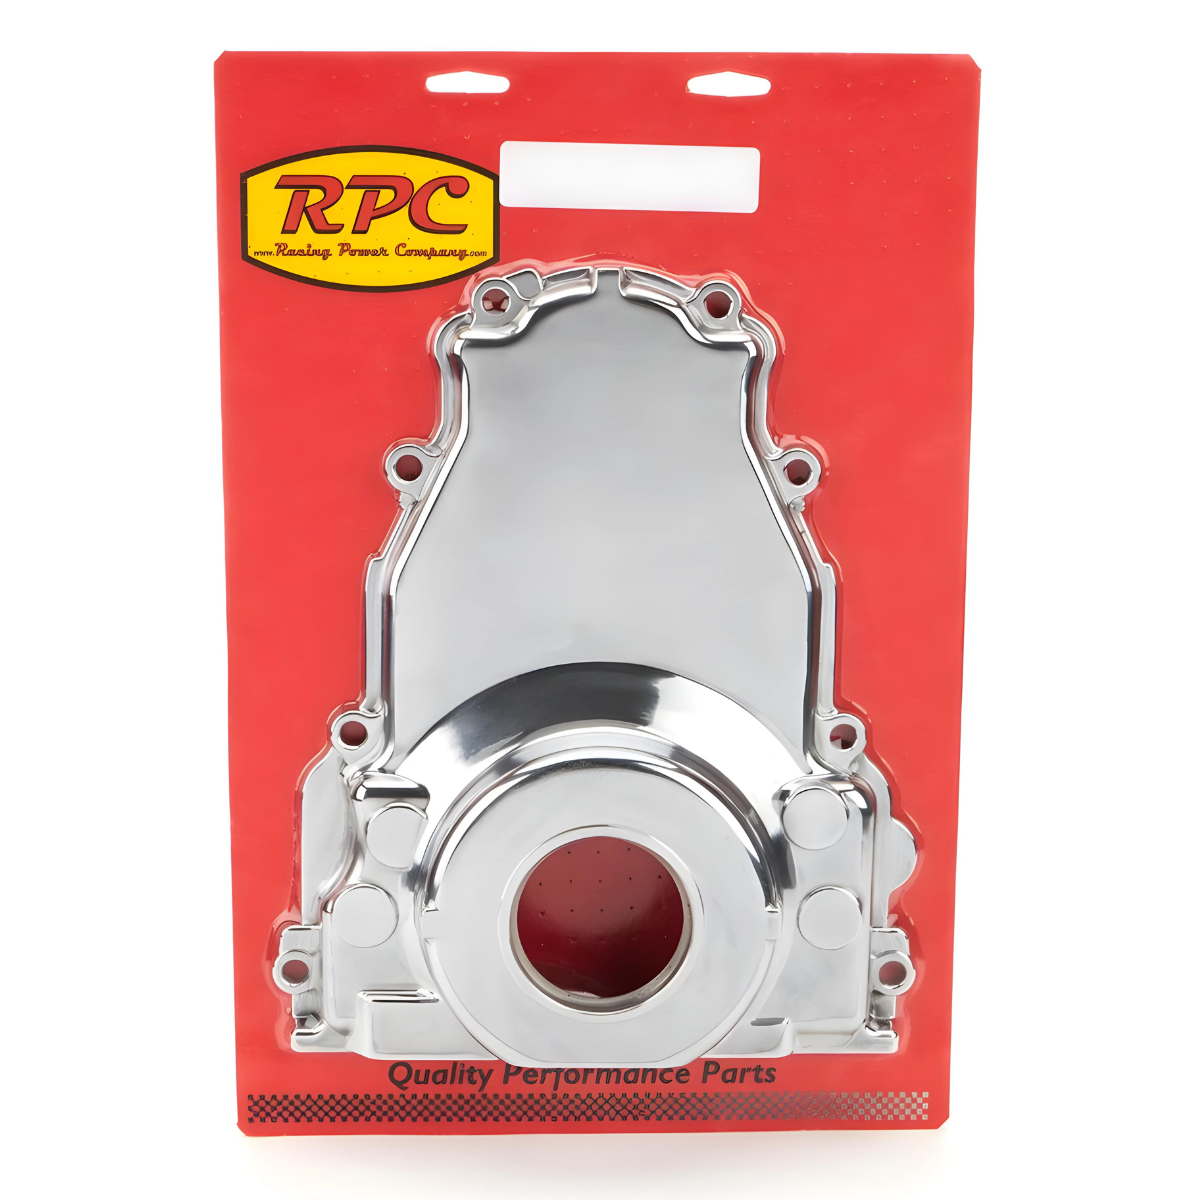 Racing Power Company R8472POL GM LS Alum Timing Cover Fit LS1 and LS6